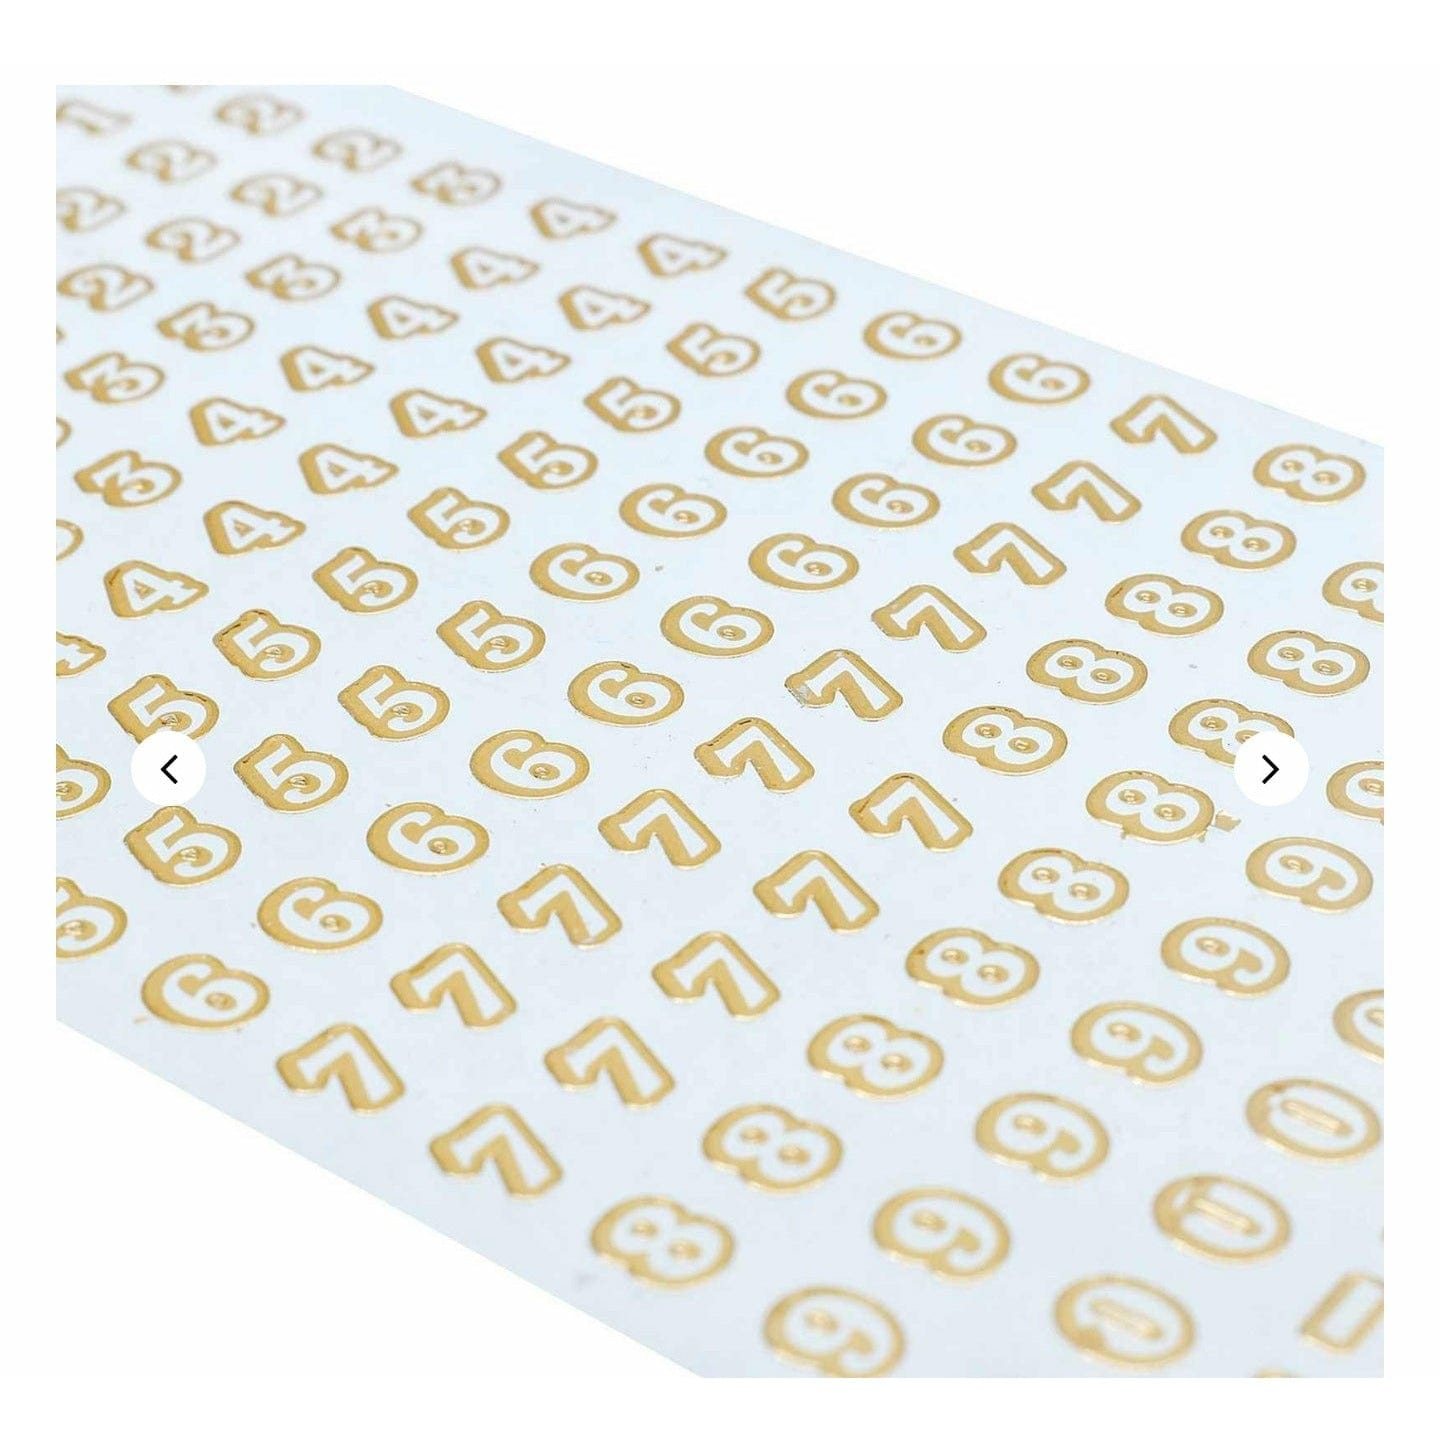 jags Journaling Supplies Numeric Stickers for resin and hobby crafts, BTS edition journaling stickers